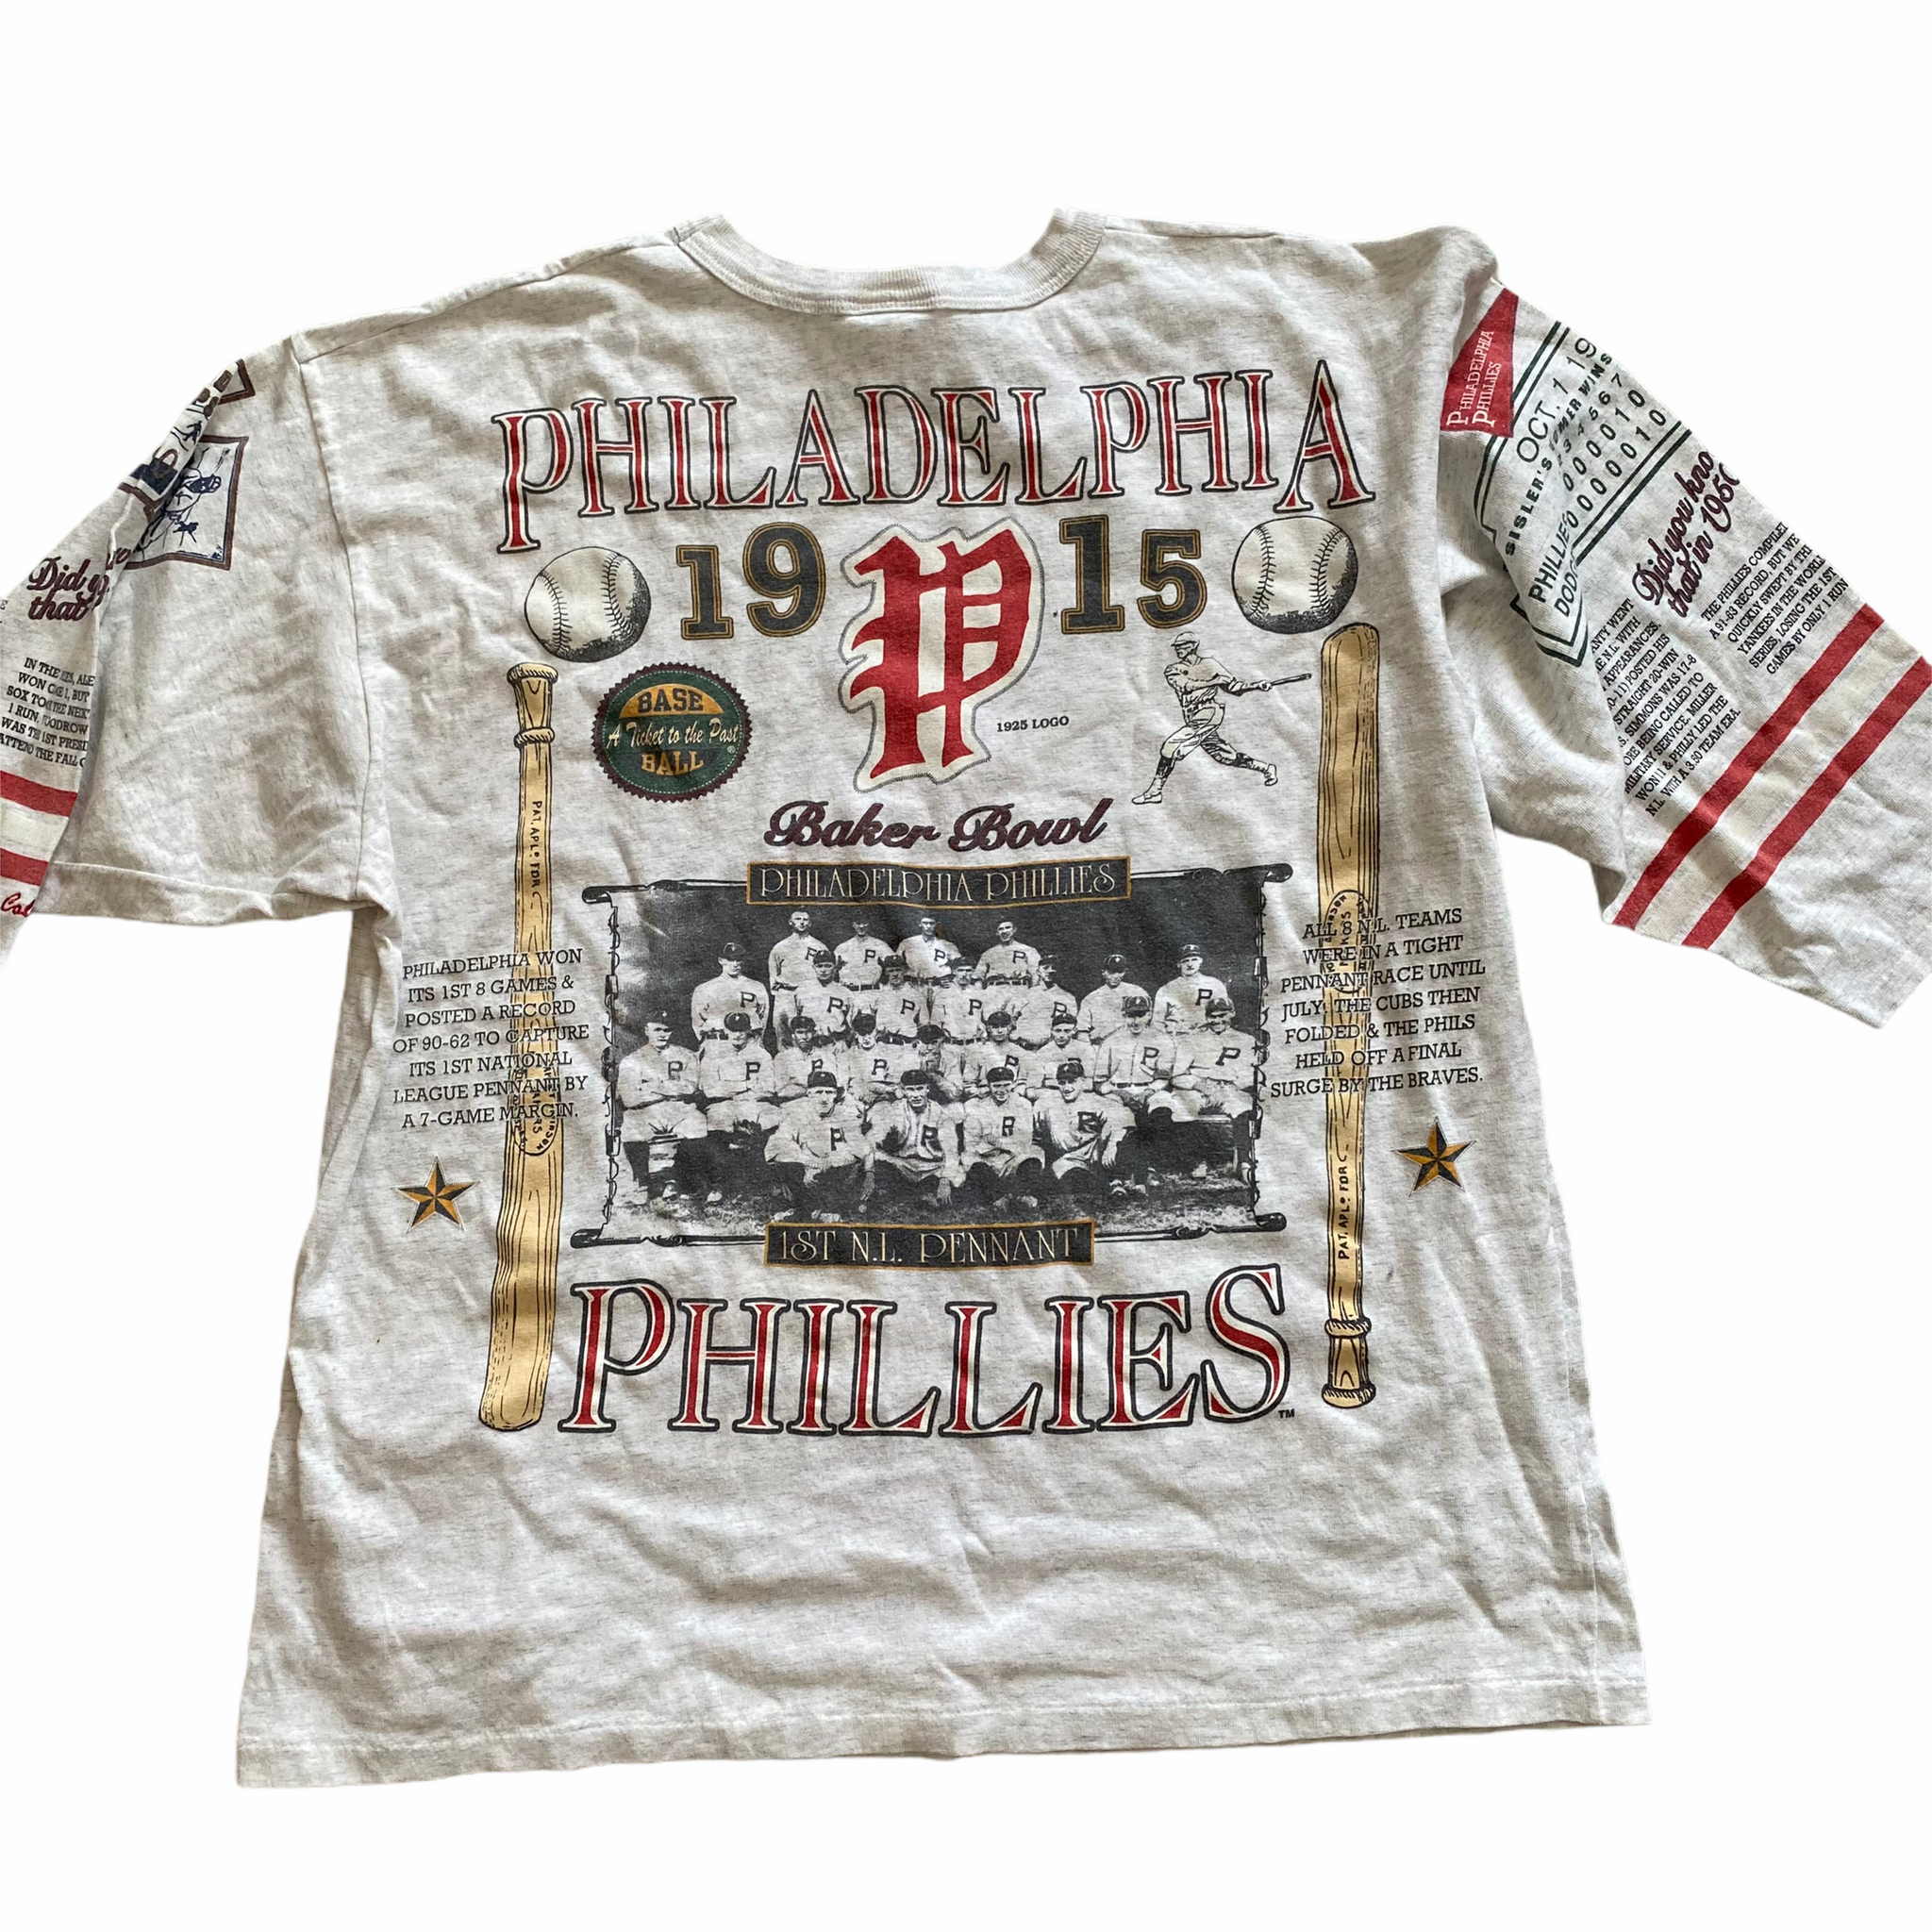 off white phillies jersey